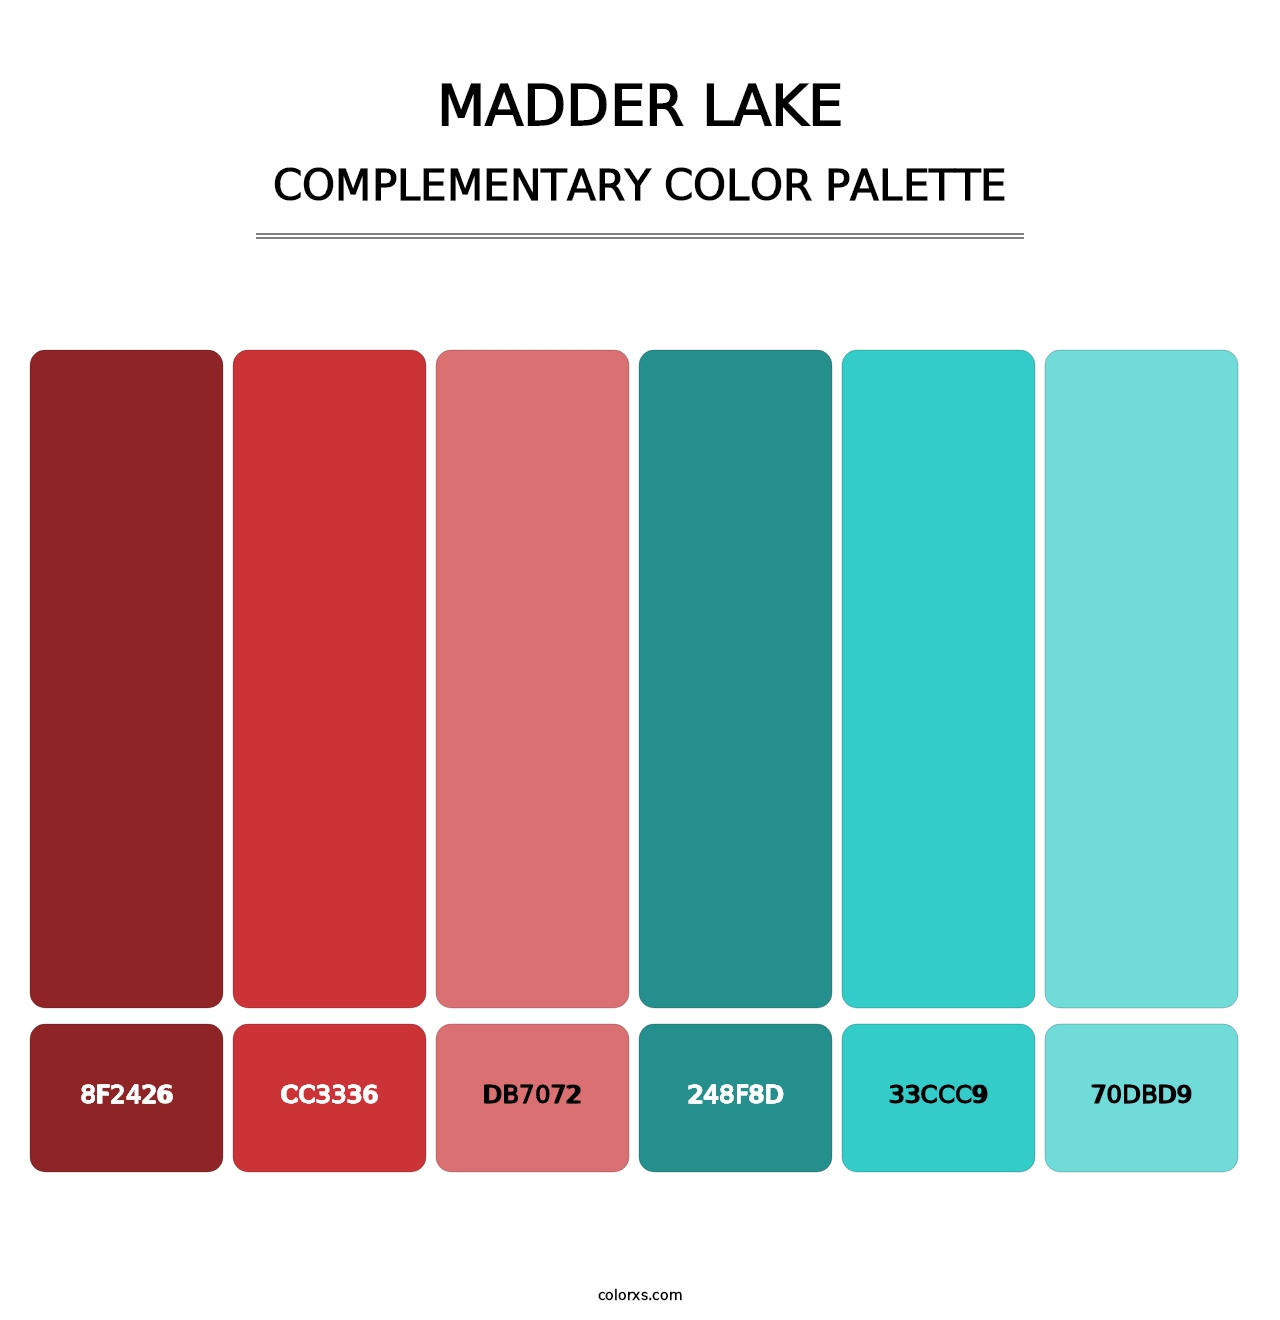 Madder Lake - Complementary Color Palette